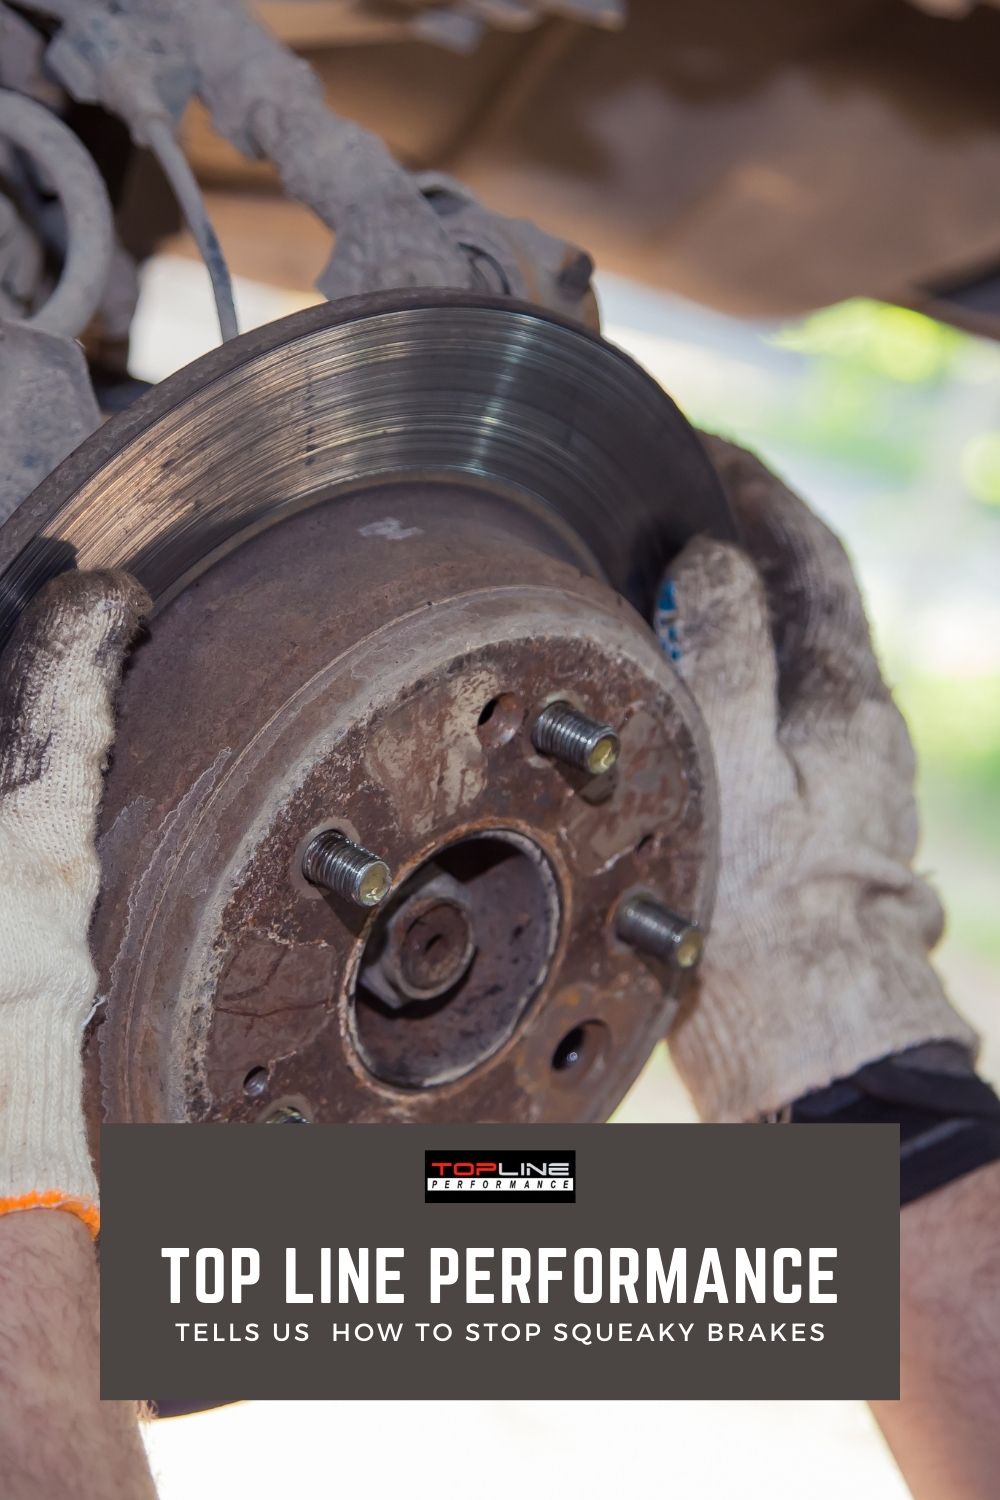 A guide to fixing squeaky brakes with the help of an auto repair shop in Huntington Beach, Ca